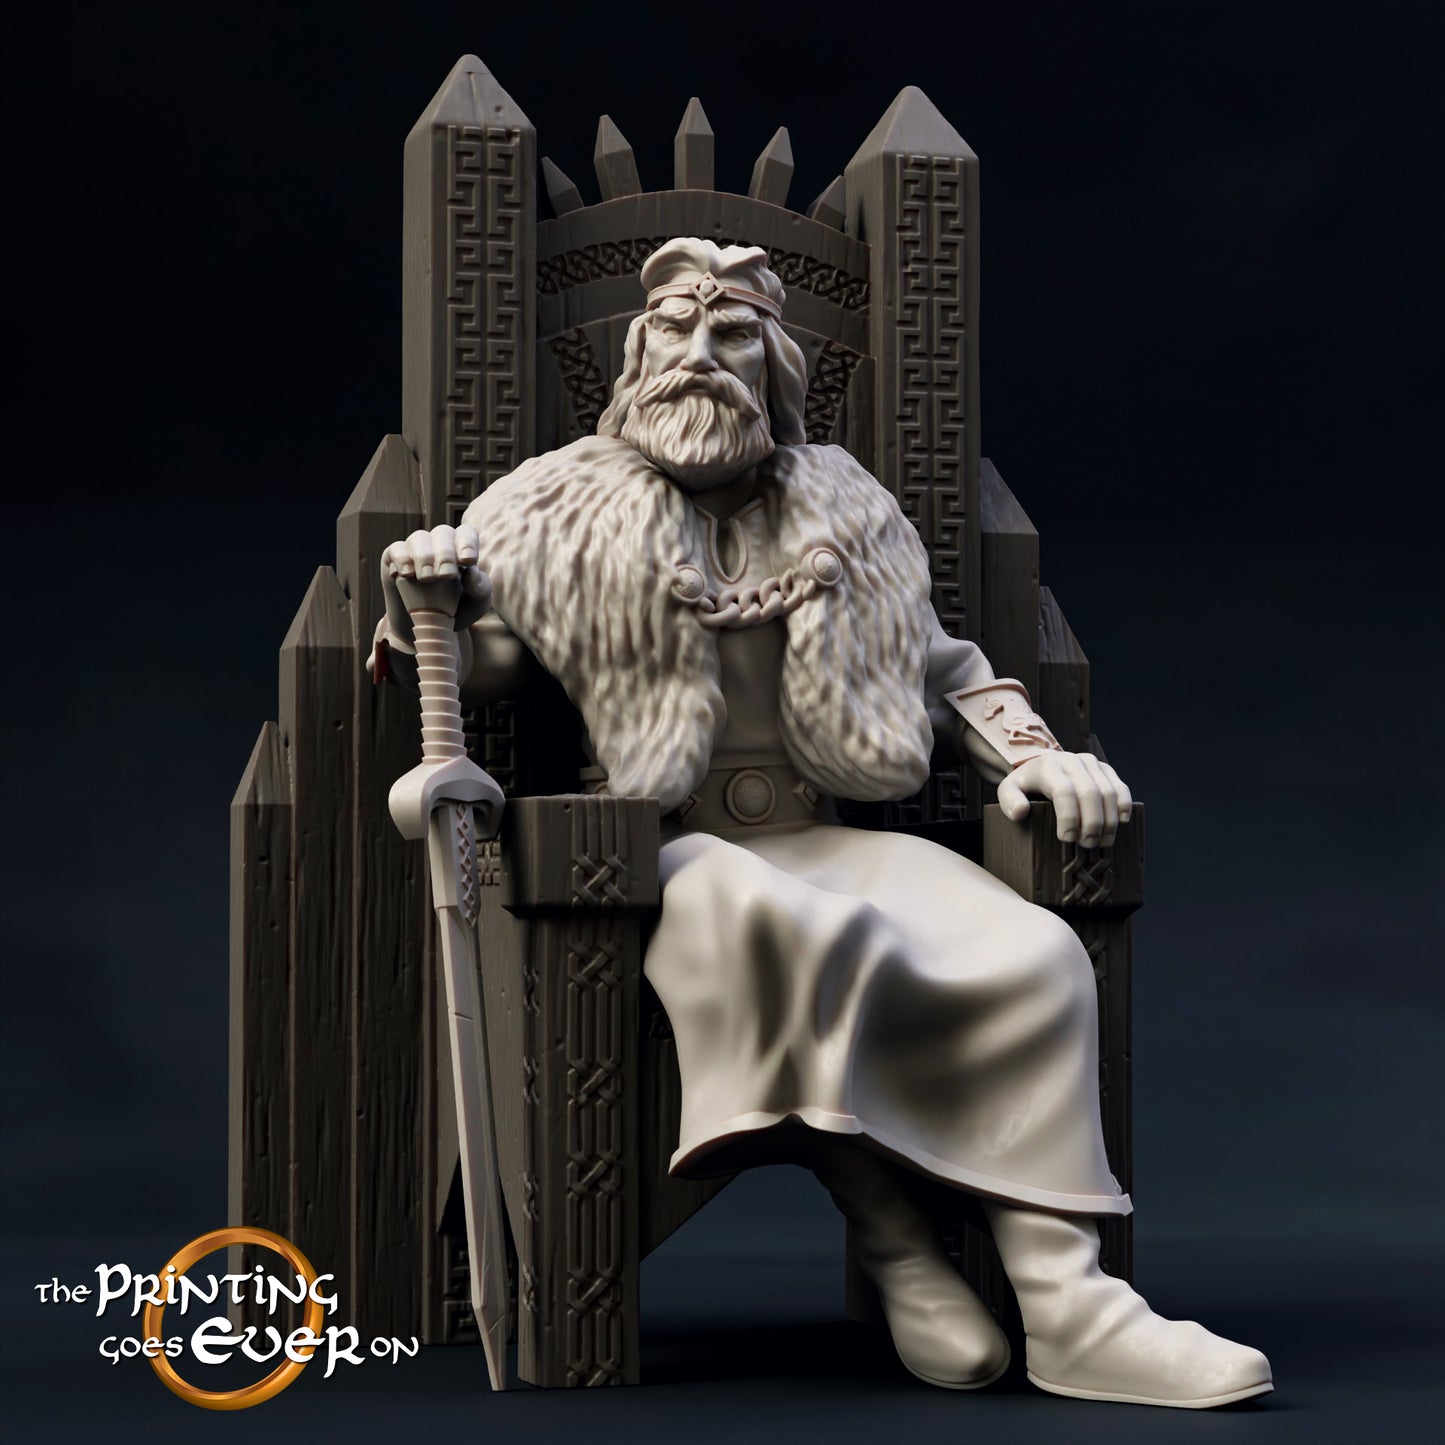 King Teobald on Throne by The Printing Goes Ever On